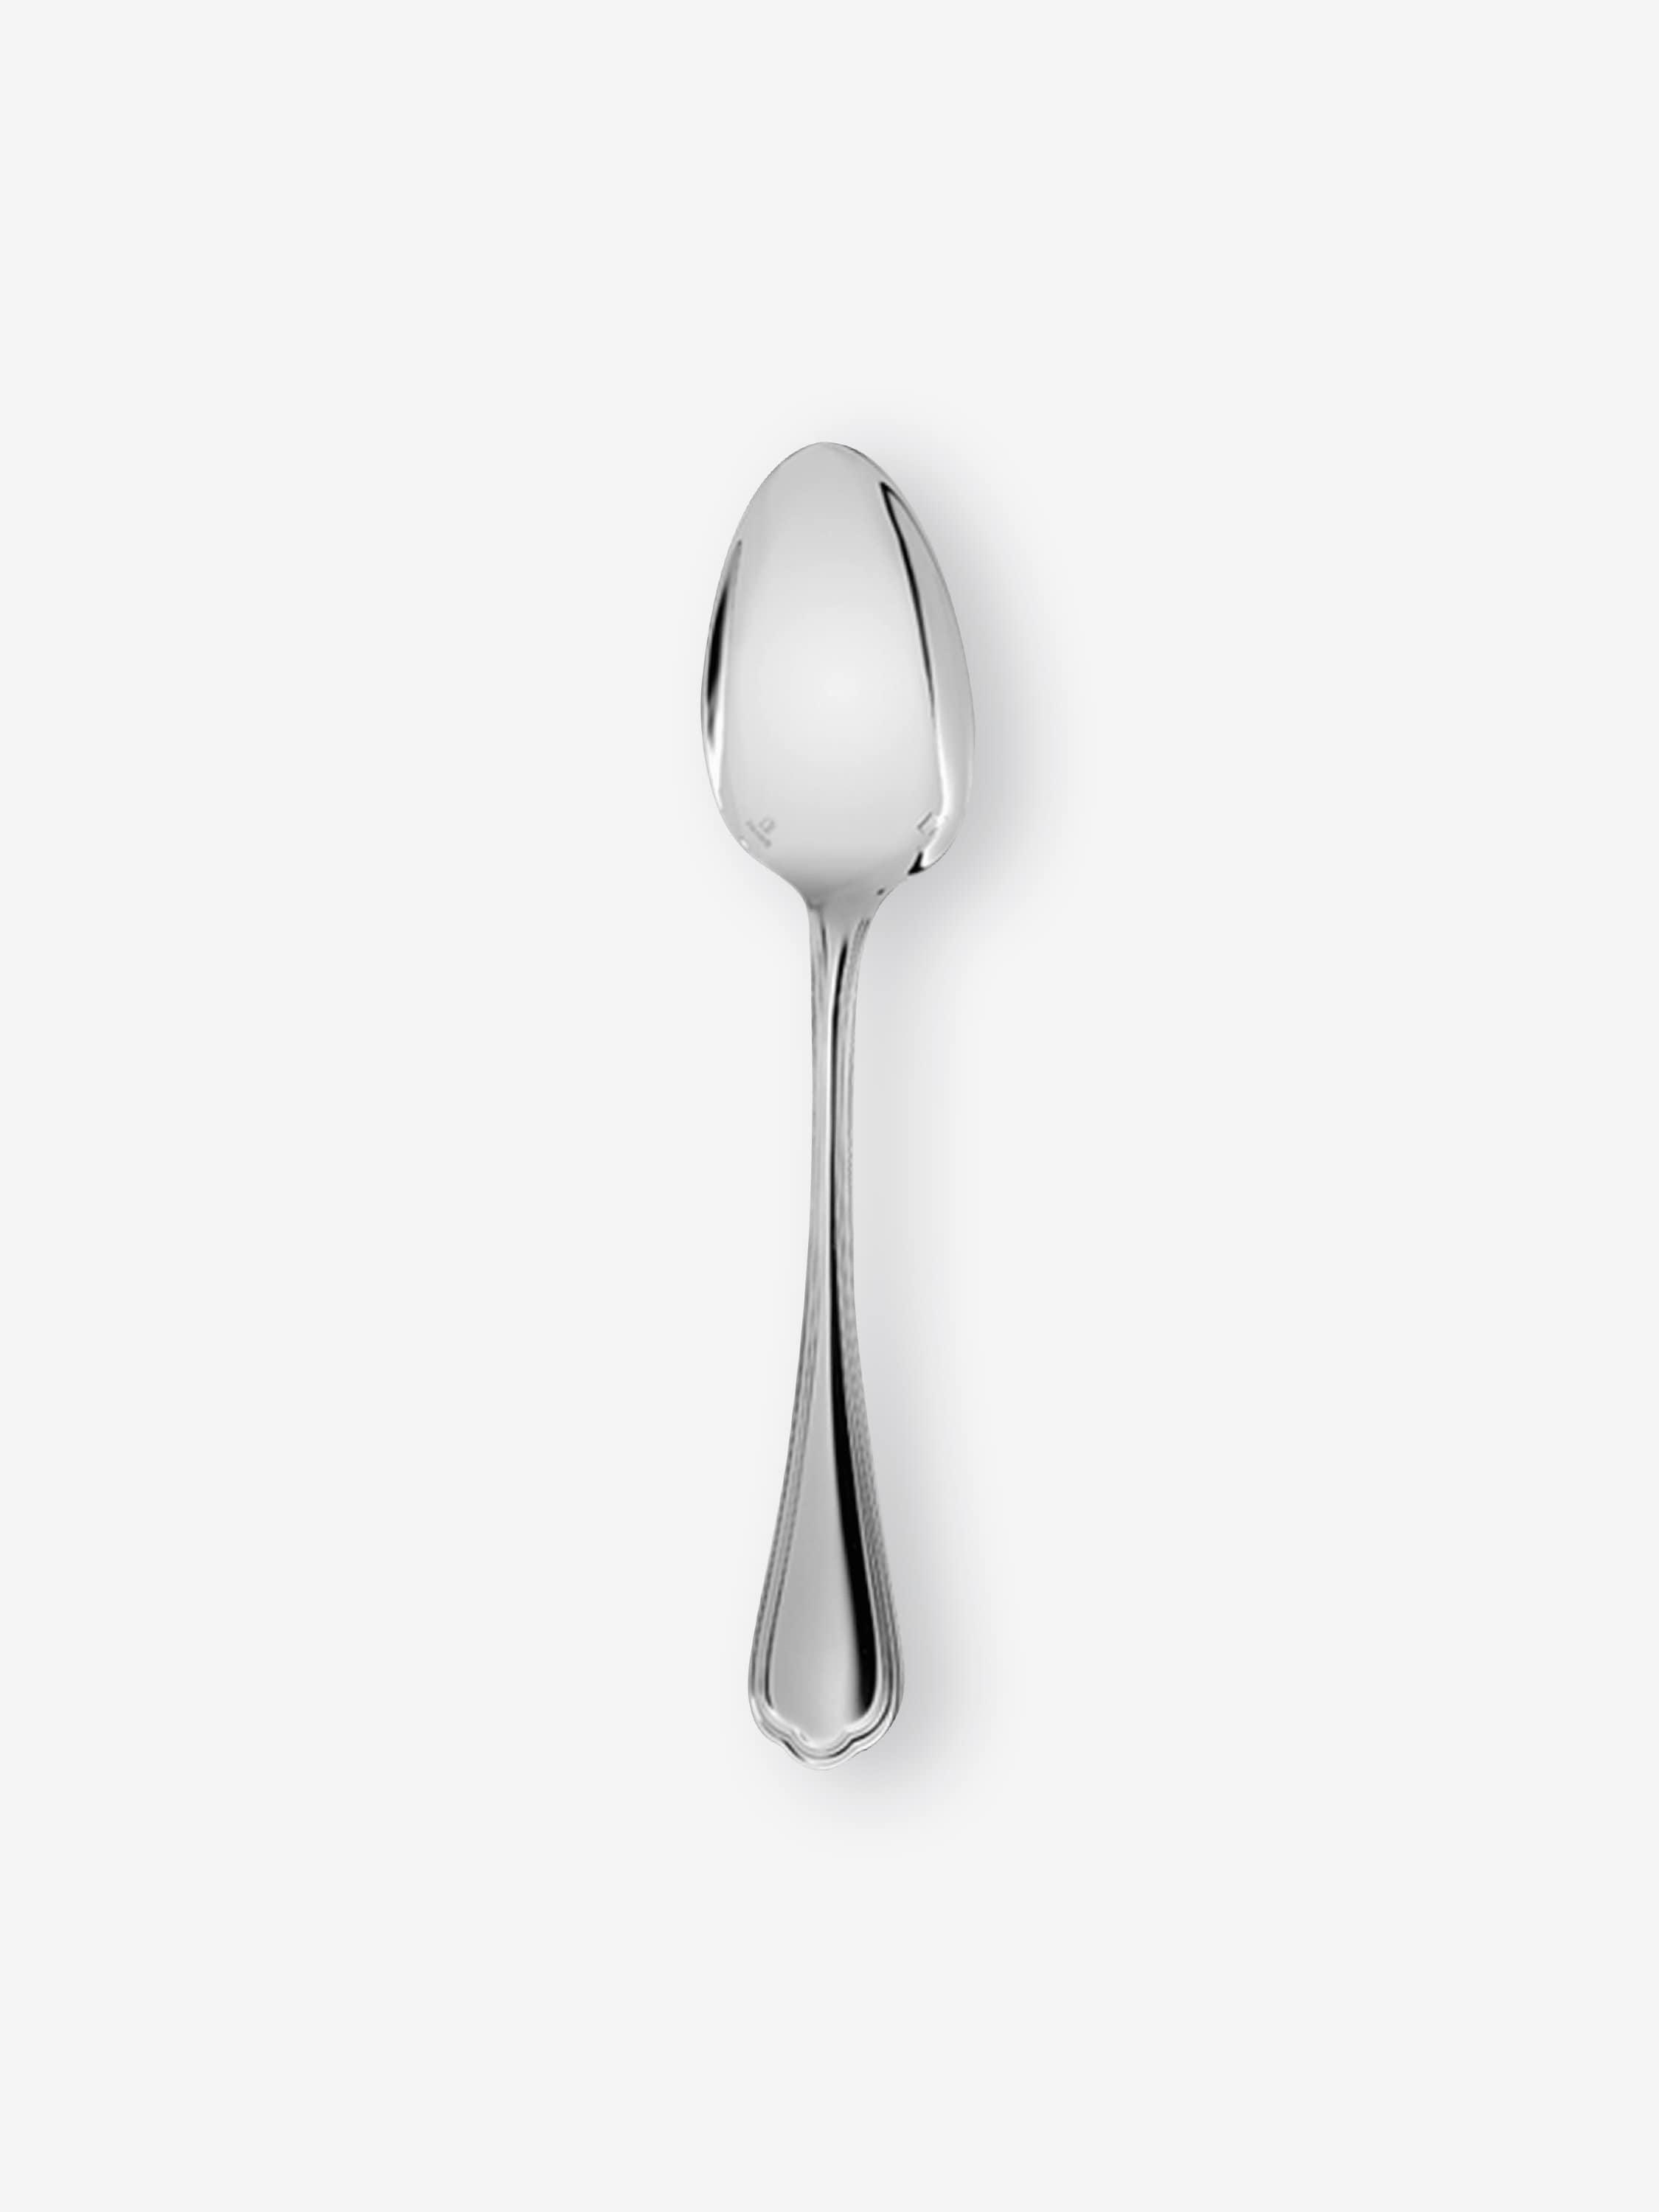 Spatours Tea Spoon in Silver Plate by Christofle